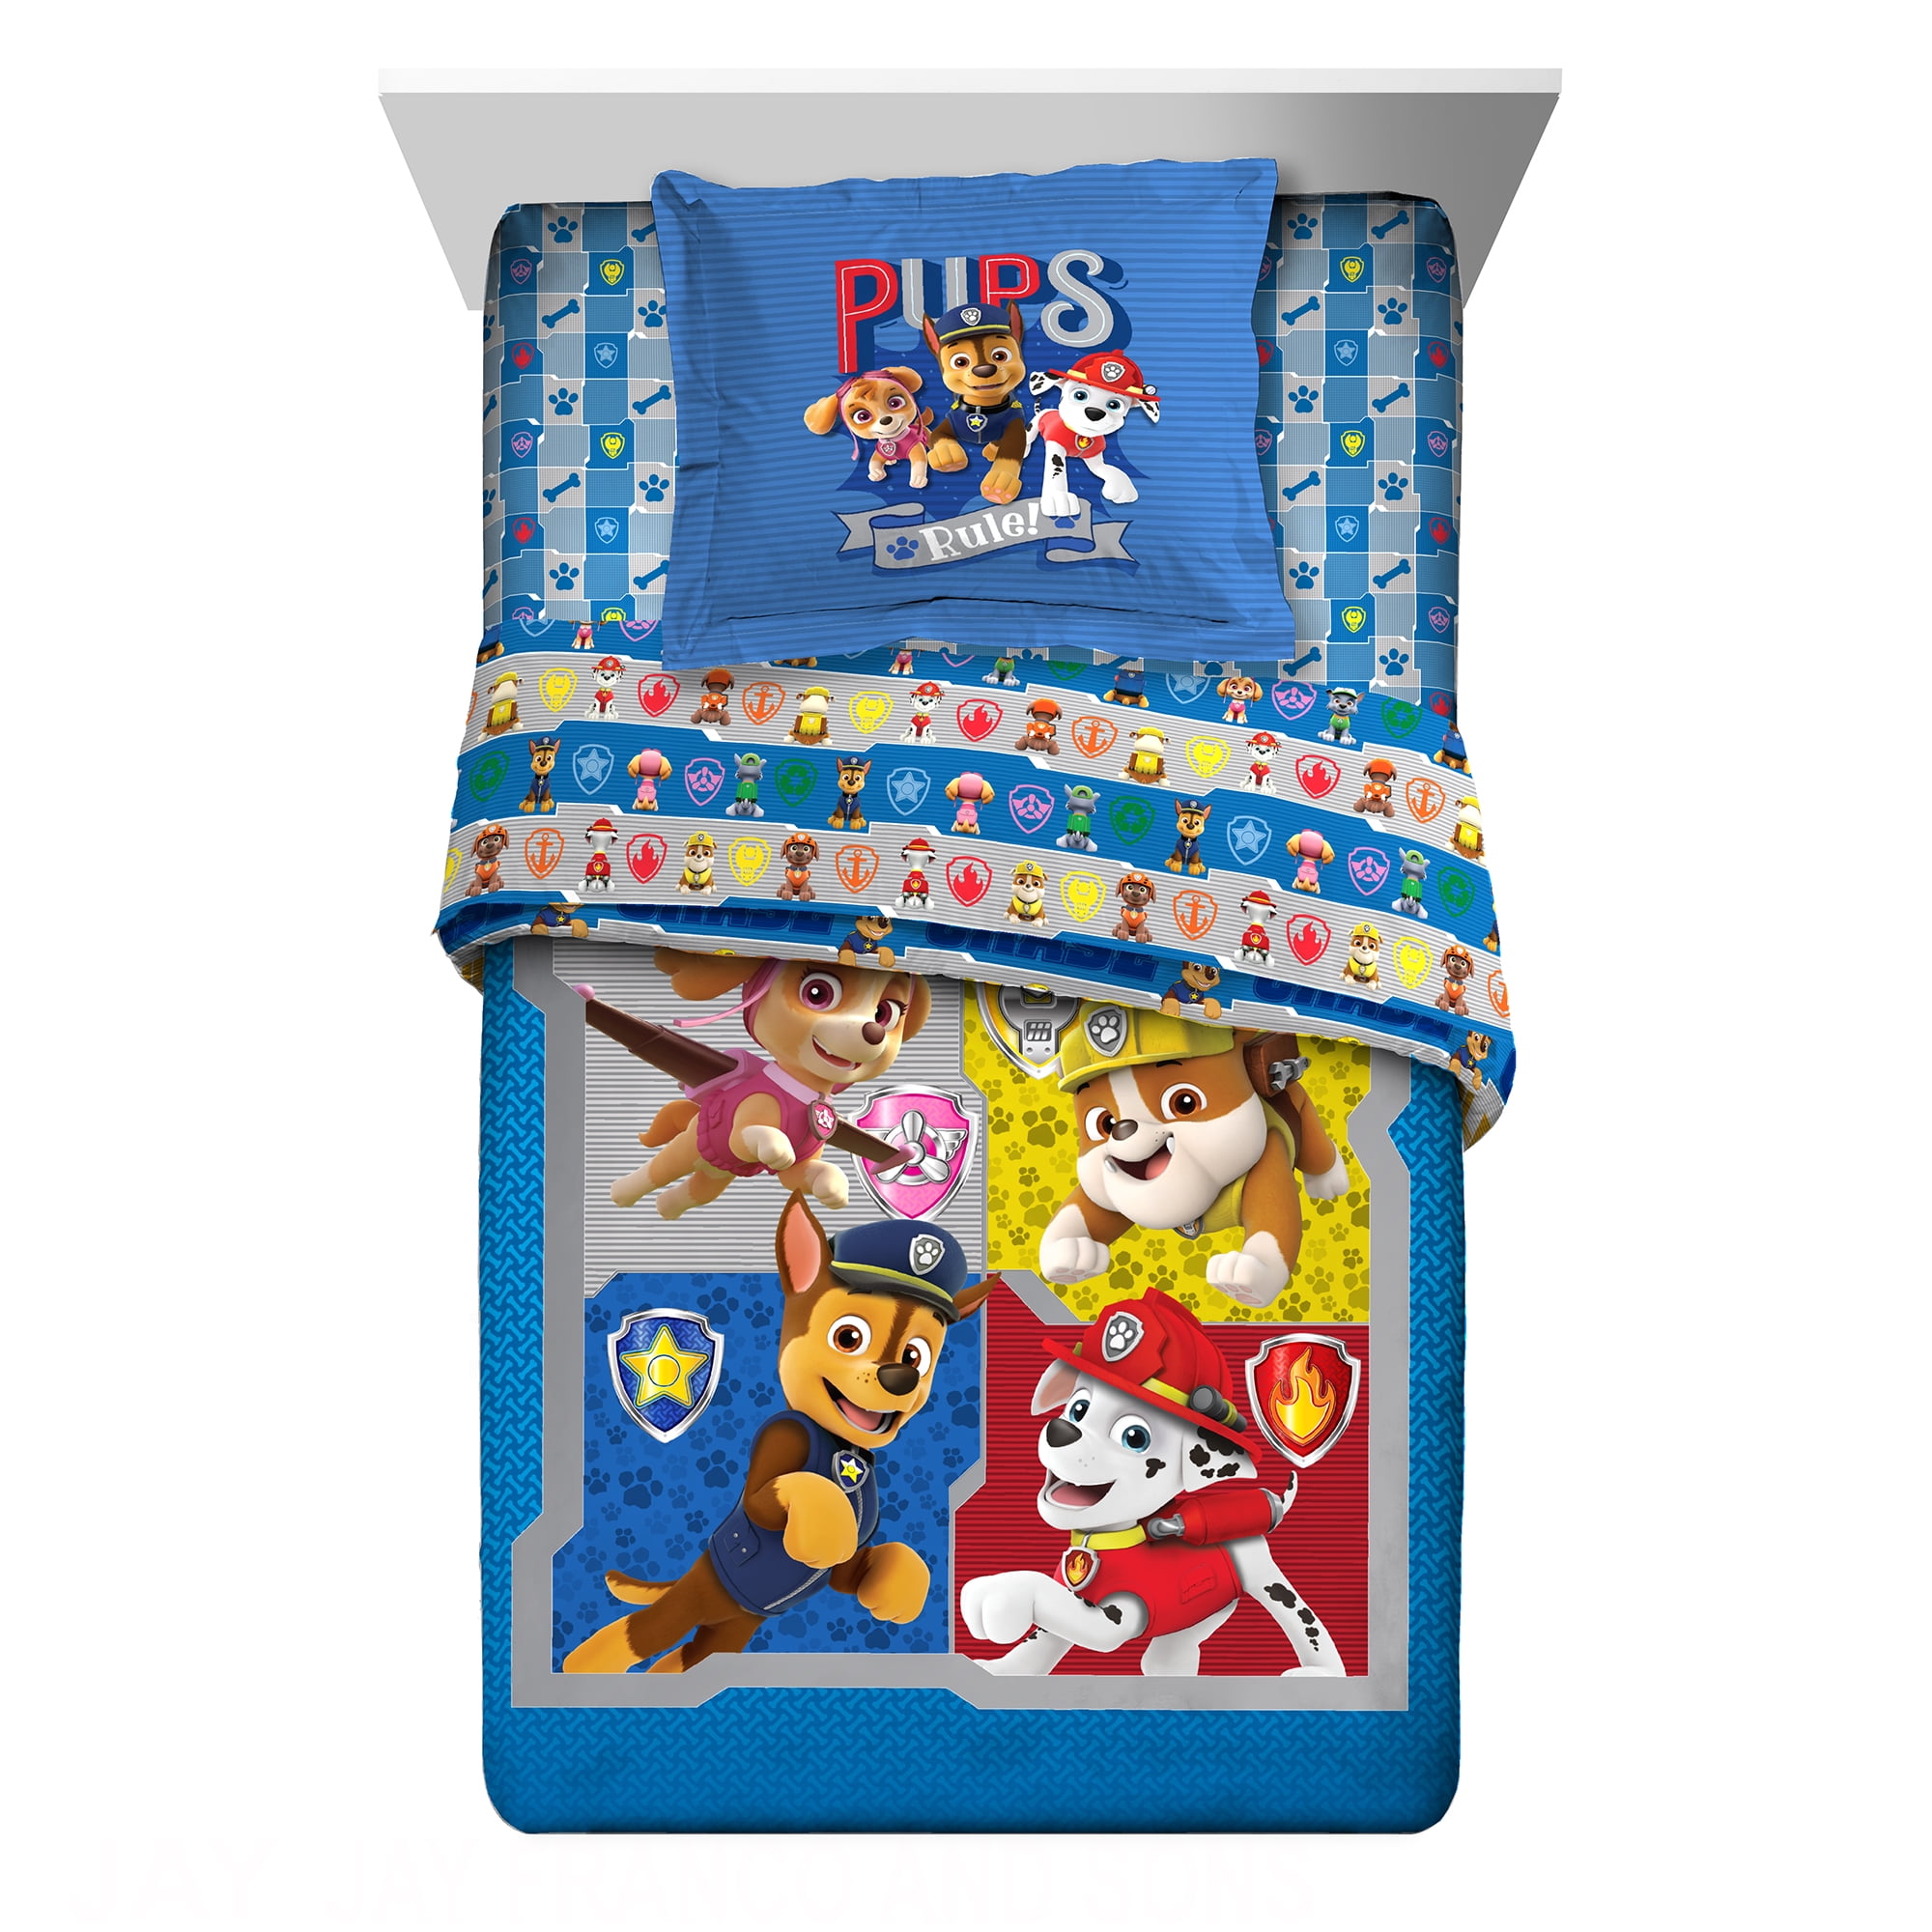 Paw Patrol 2 Piece Comforter And Sham, Paw Patrol Sheets For Twin Bed